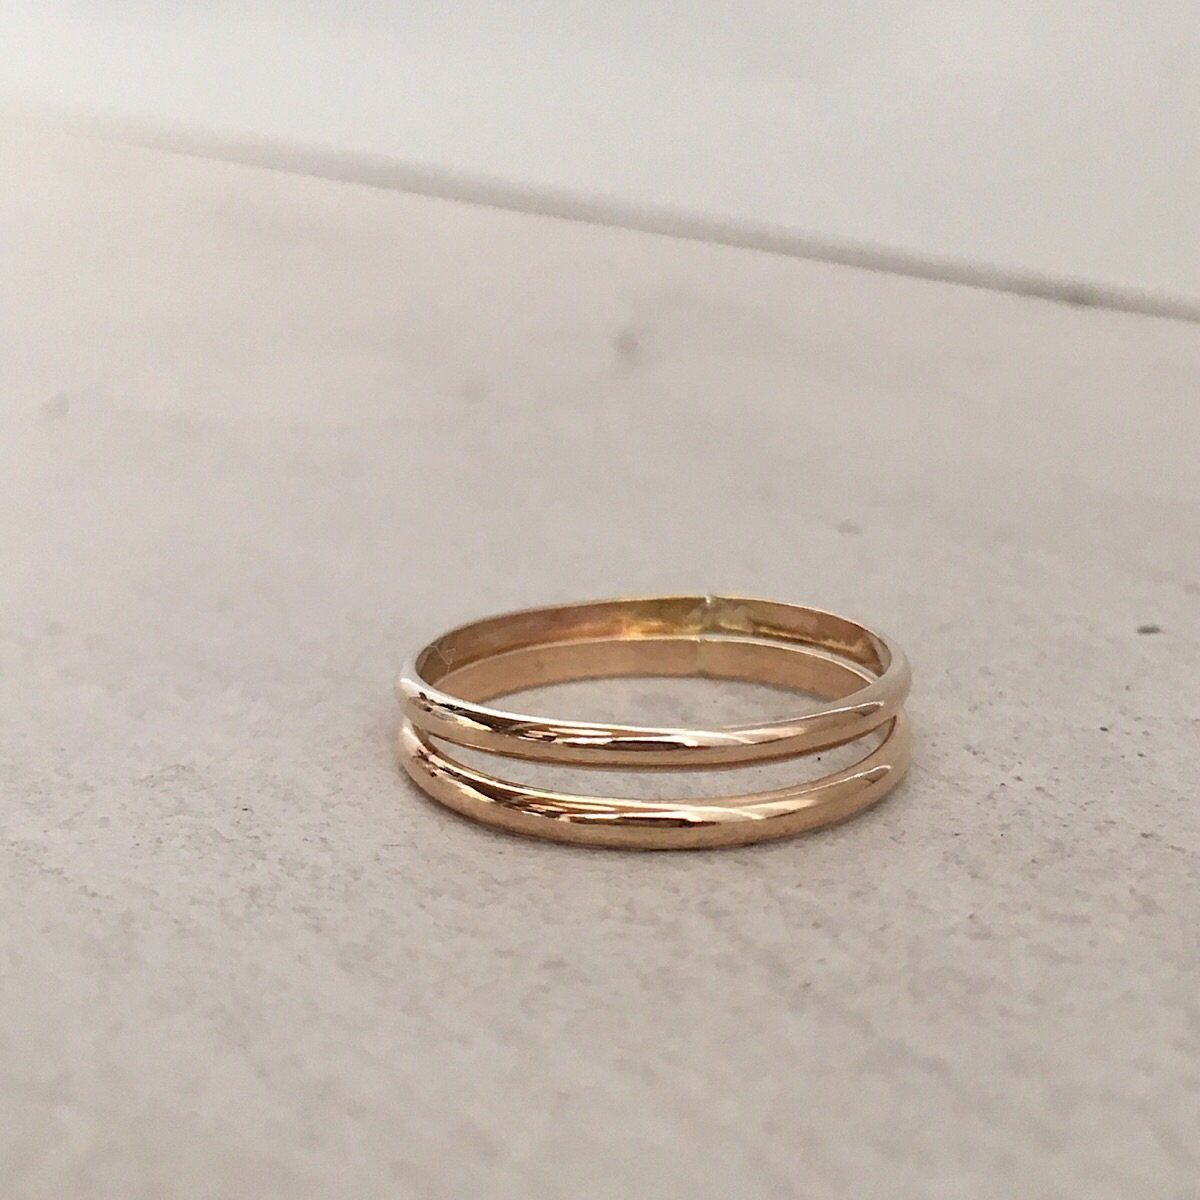 Skinny Stacker Ring Gold  - IsabelleGraceJewelry